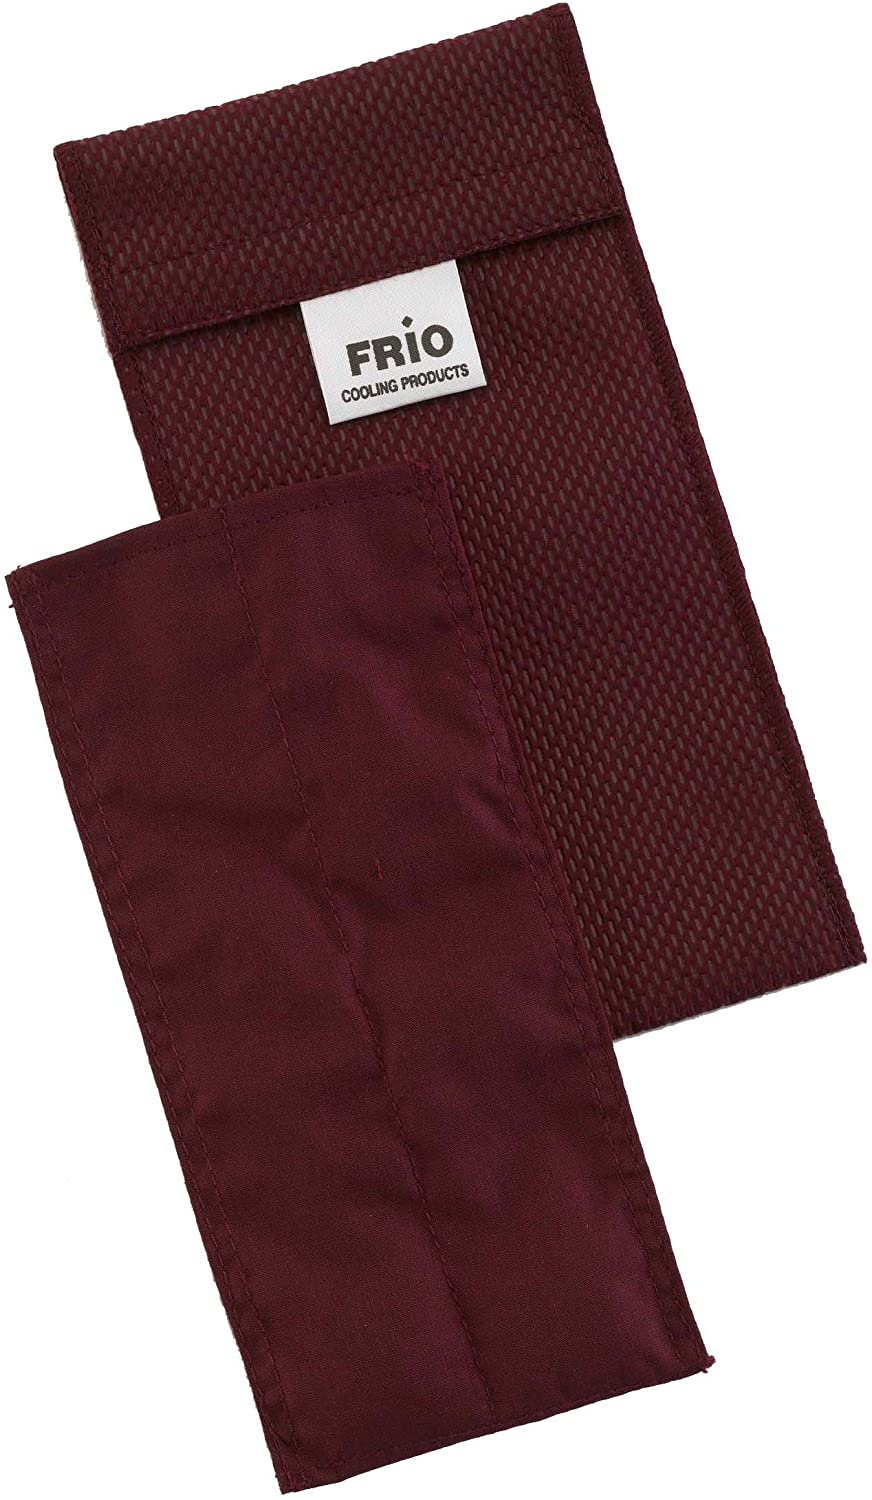 FRIO Diabetic Bag 2 Pens Wine Red 8 x 18 cm Insulin Cool Bag for Travelling without Ice Pack